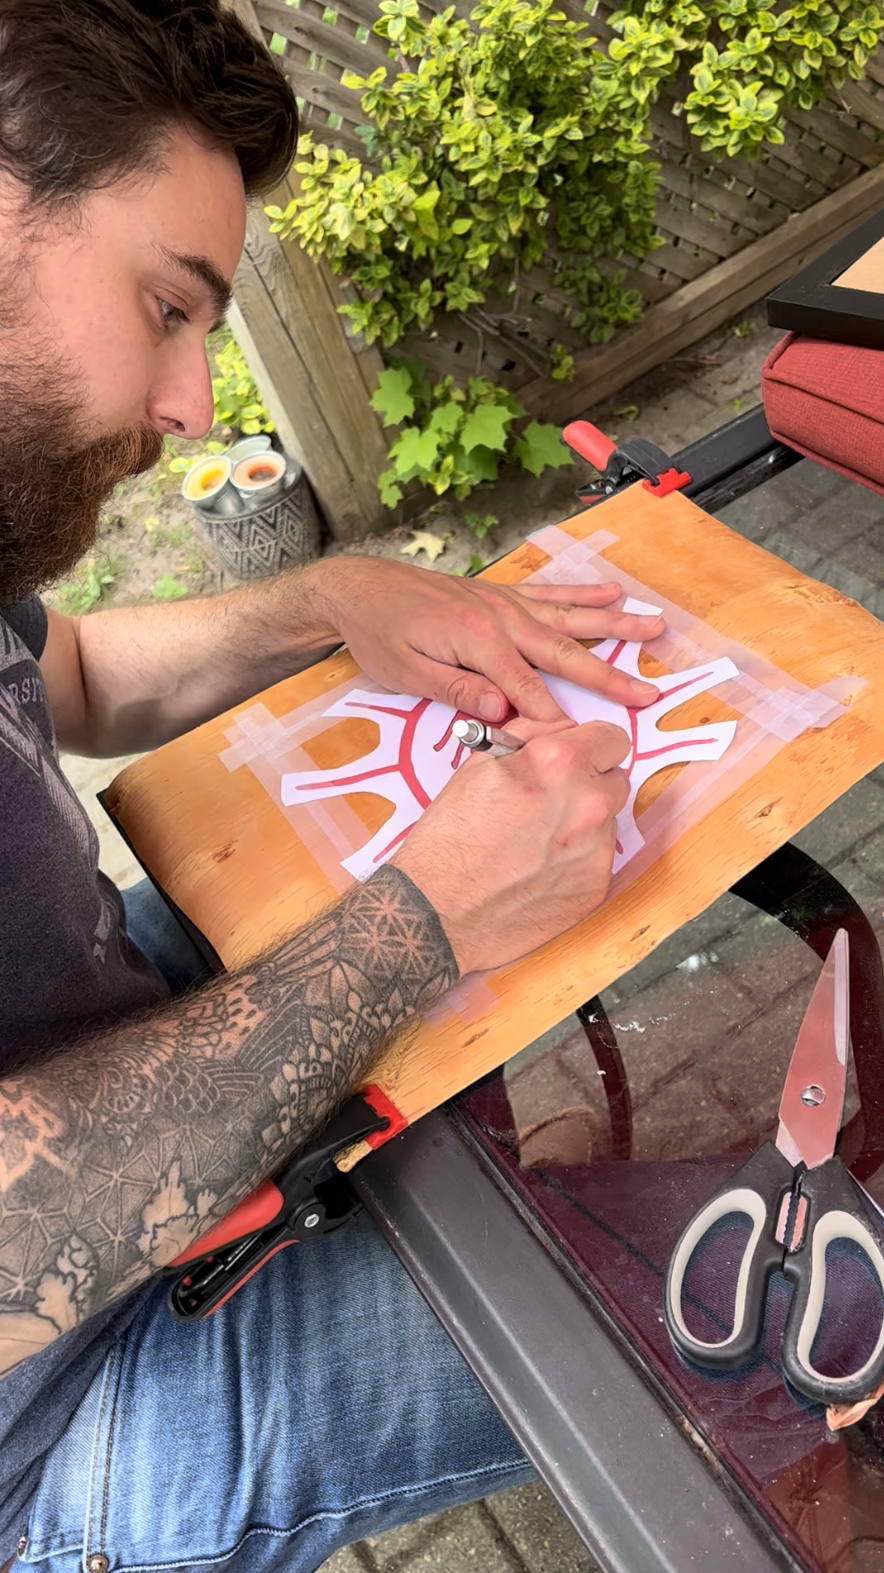 A person working on artwork